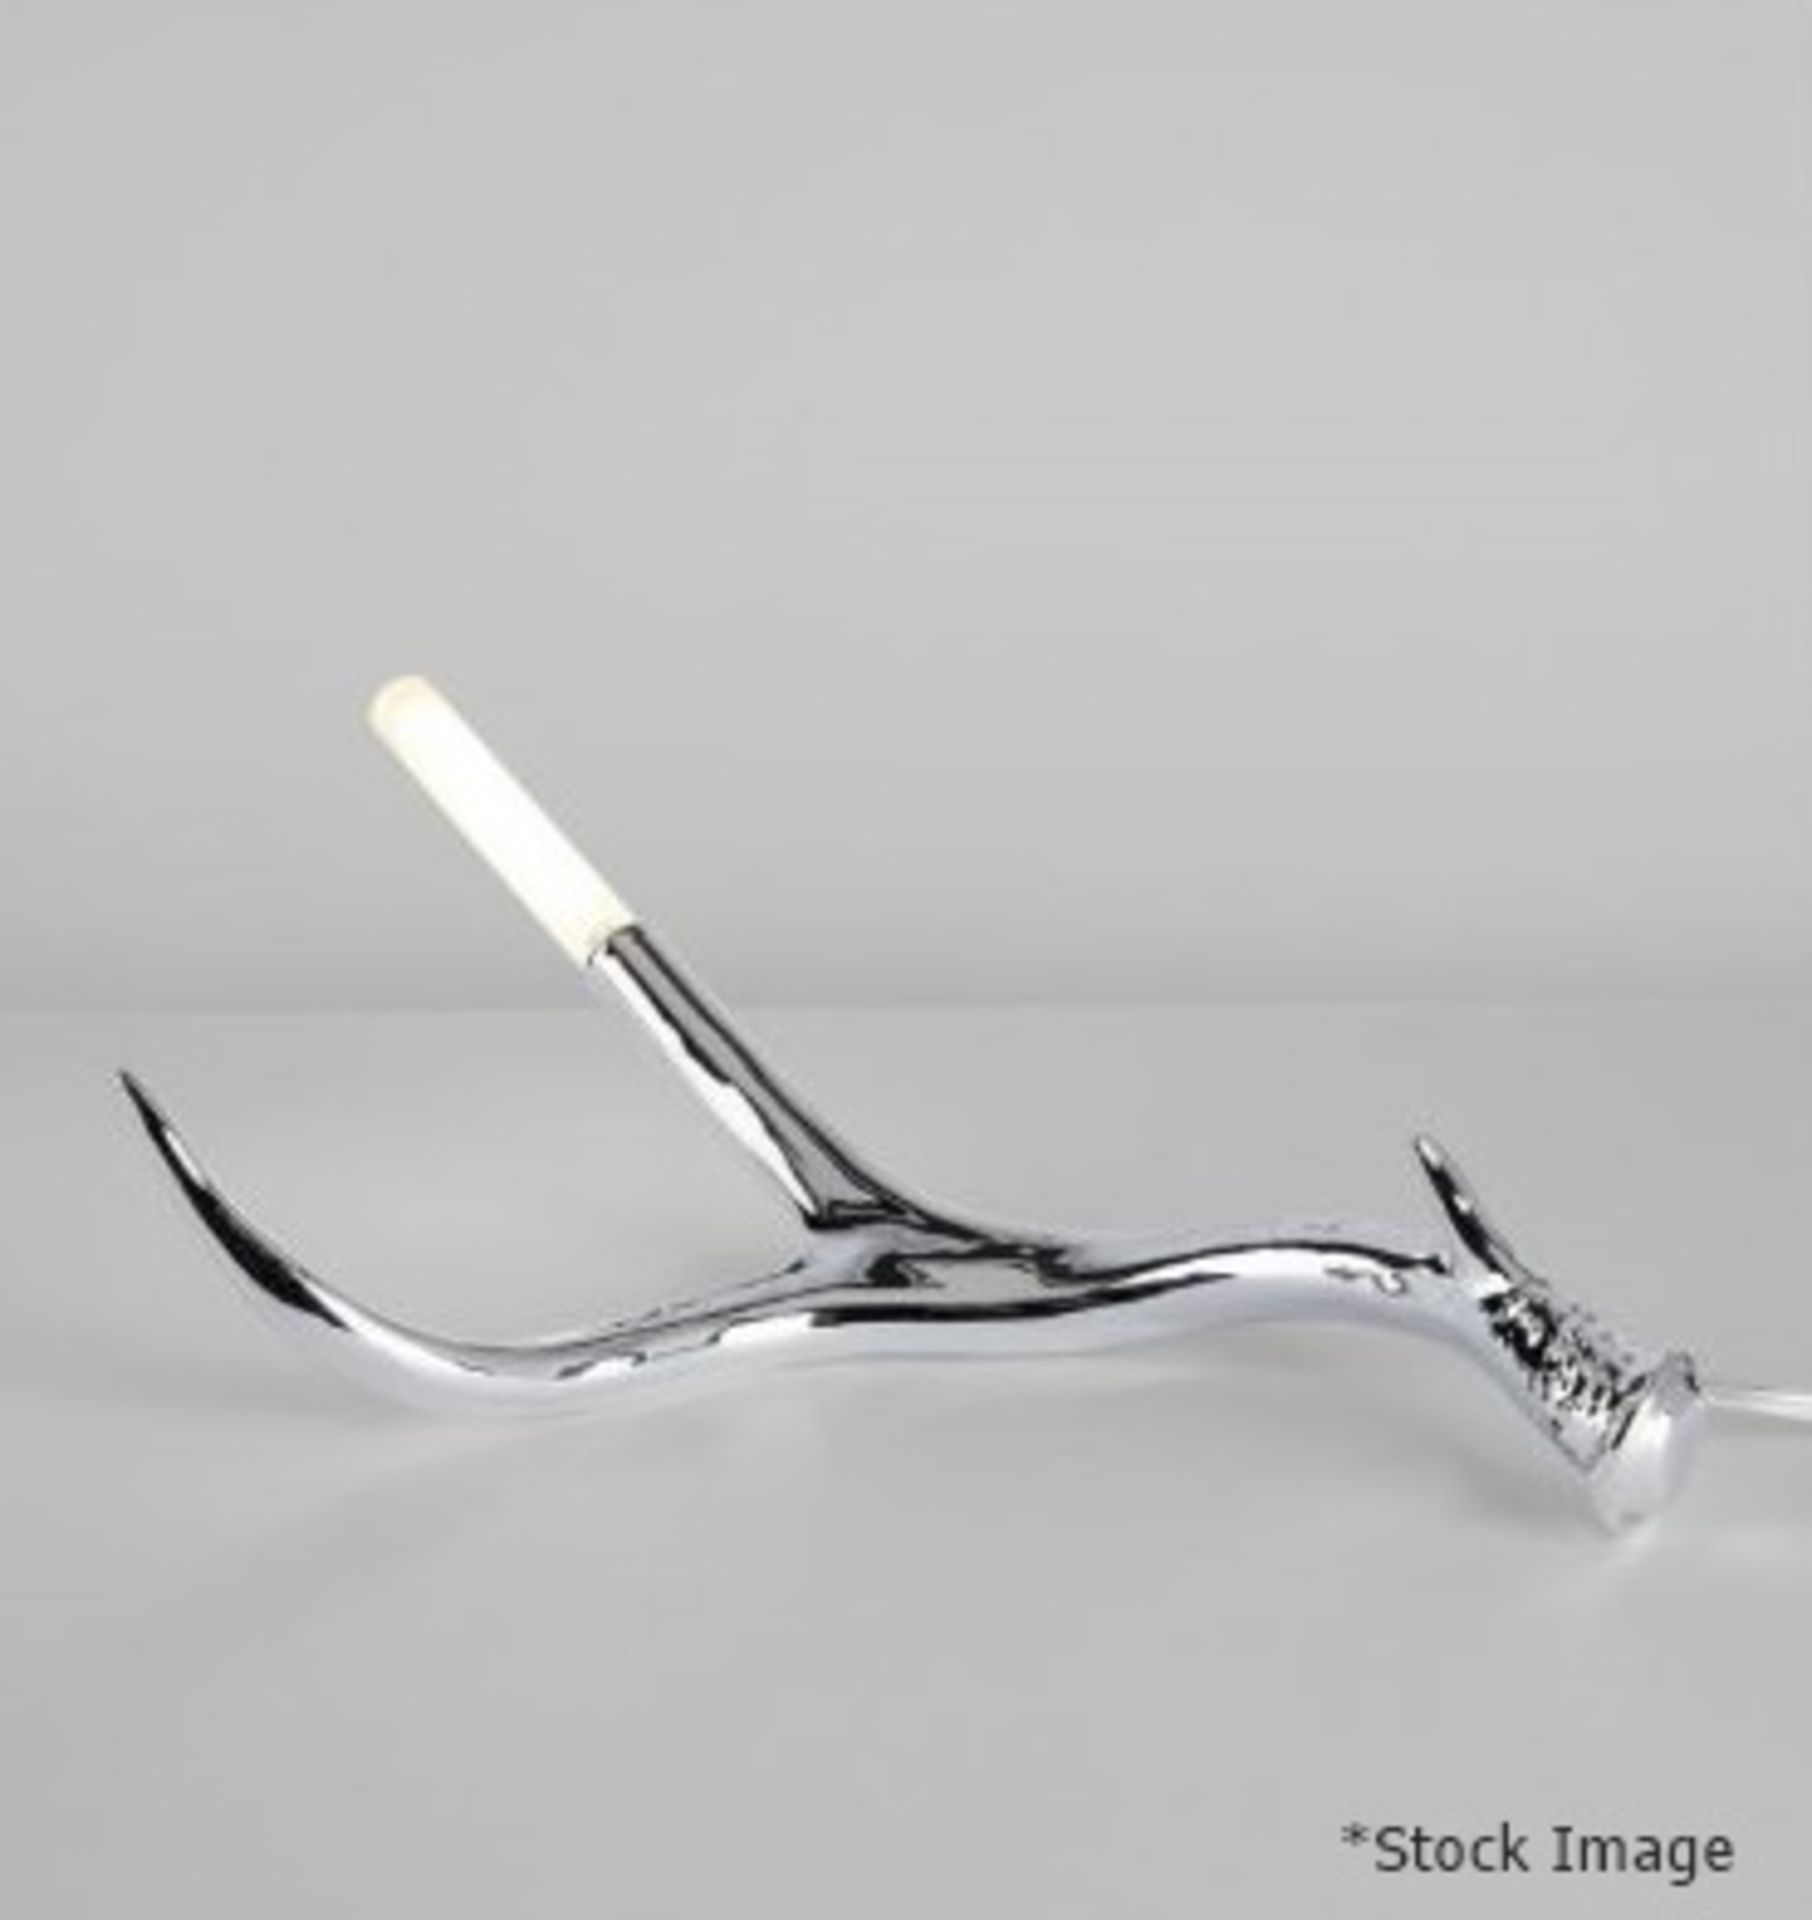 1 x ROLL & HILL 'Superordinate Antler' Designer Ceramic Table Lamp With A Chrome Finish - RRP £280